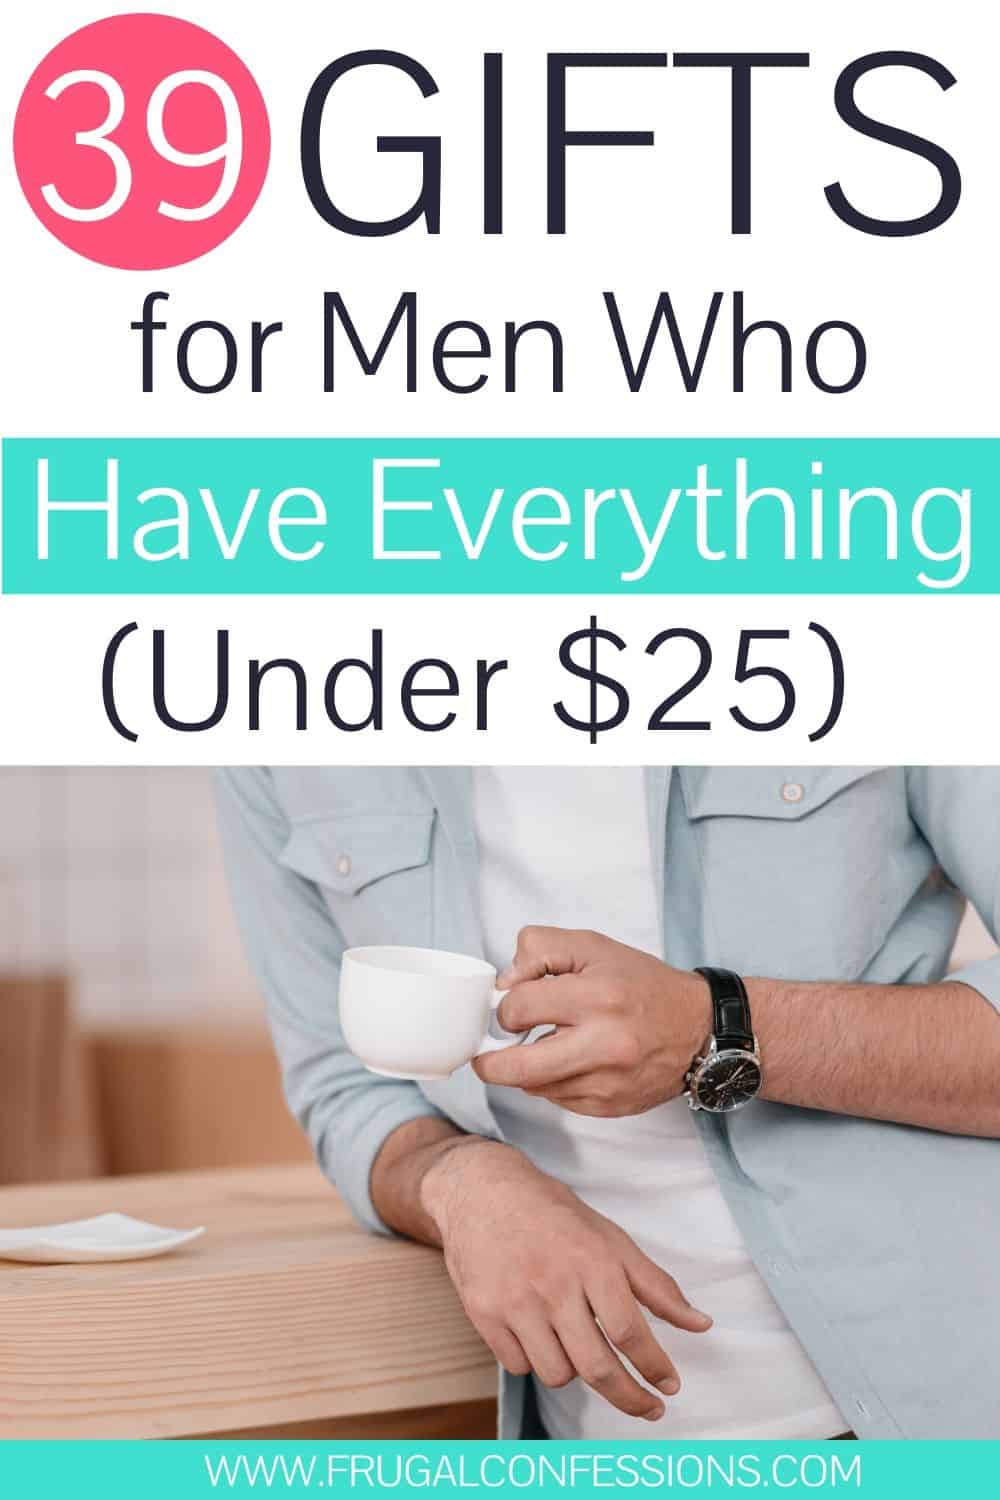 man leaning on counter with coffee, text overlay "39 gifts for men who have everything under $25"